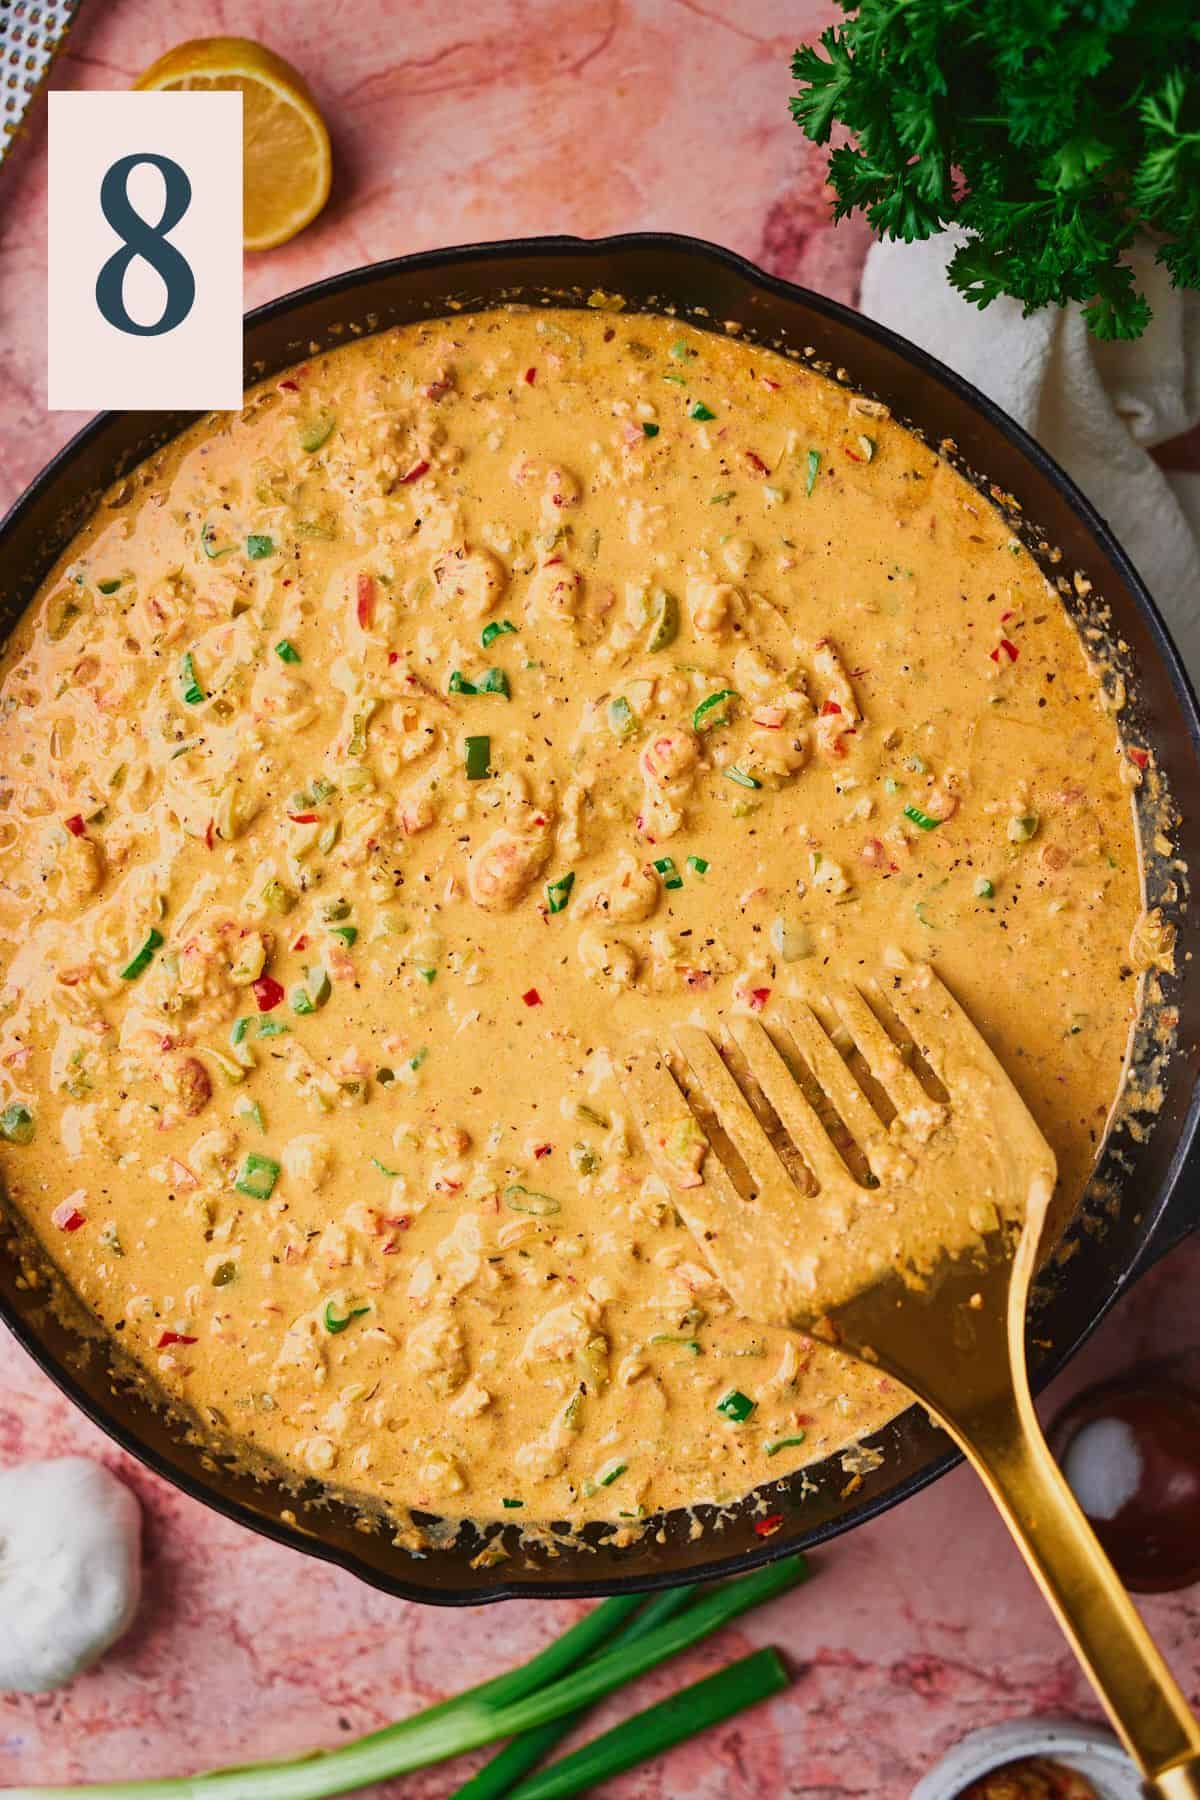 Smooth and creamy crawfish dip in a cast iron skillet with a spatula in the skillet.